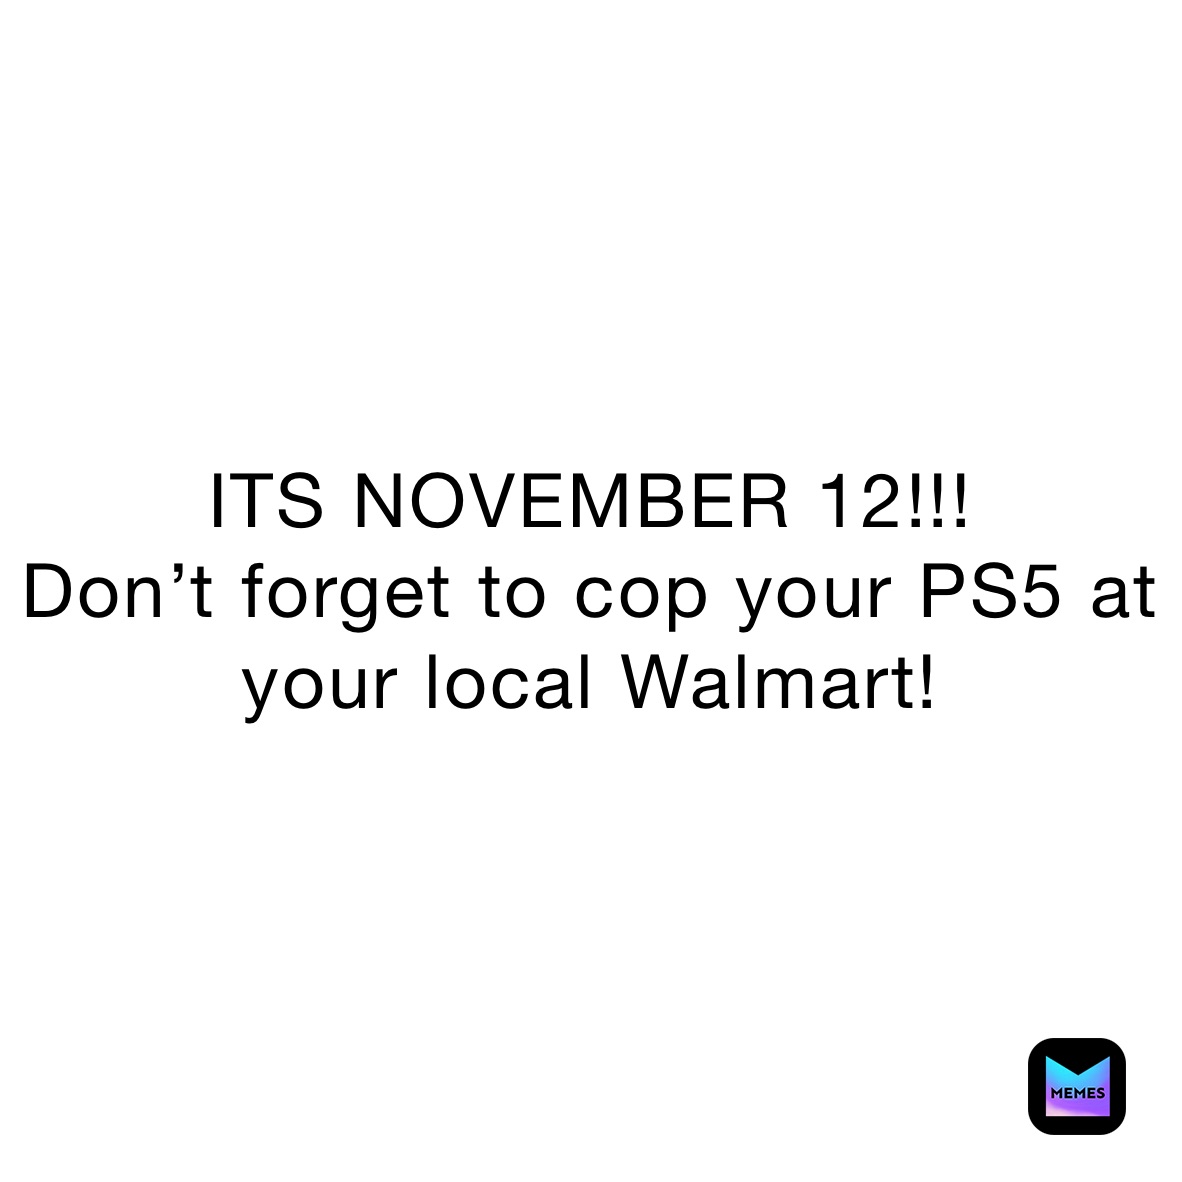 ITS NOVEMBER 12!!!
Don’t forget to cop your PS5 at your local Walmart!